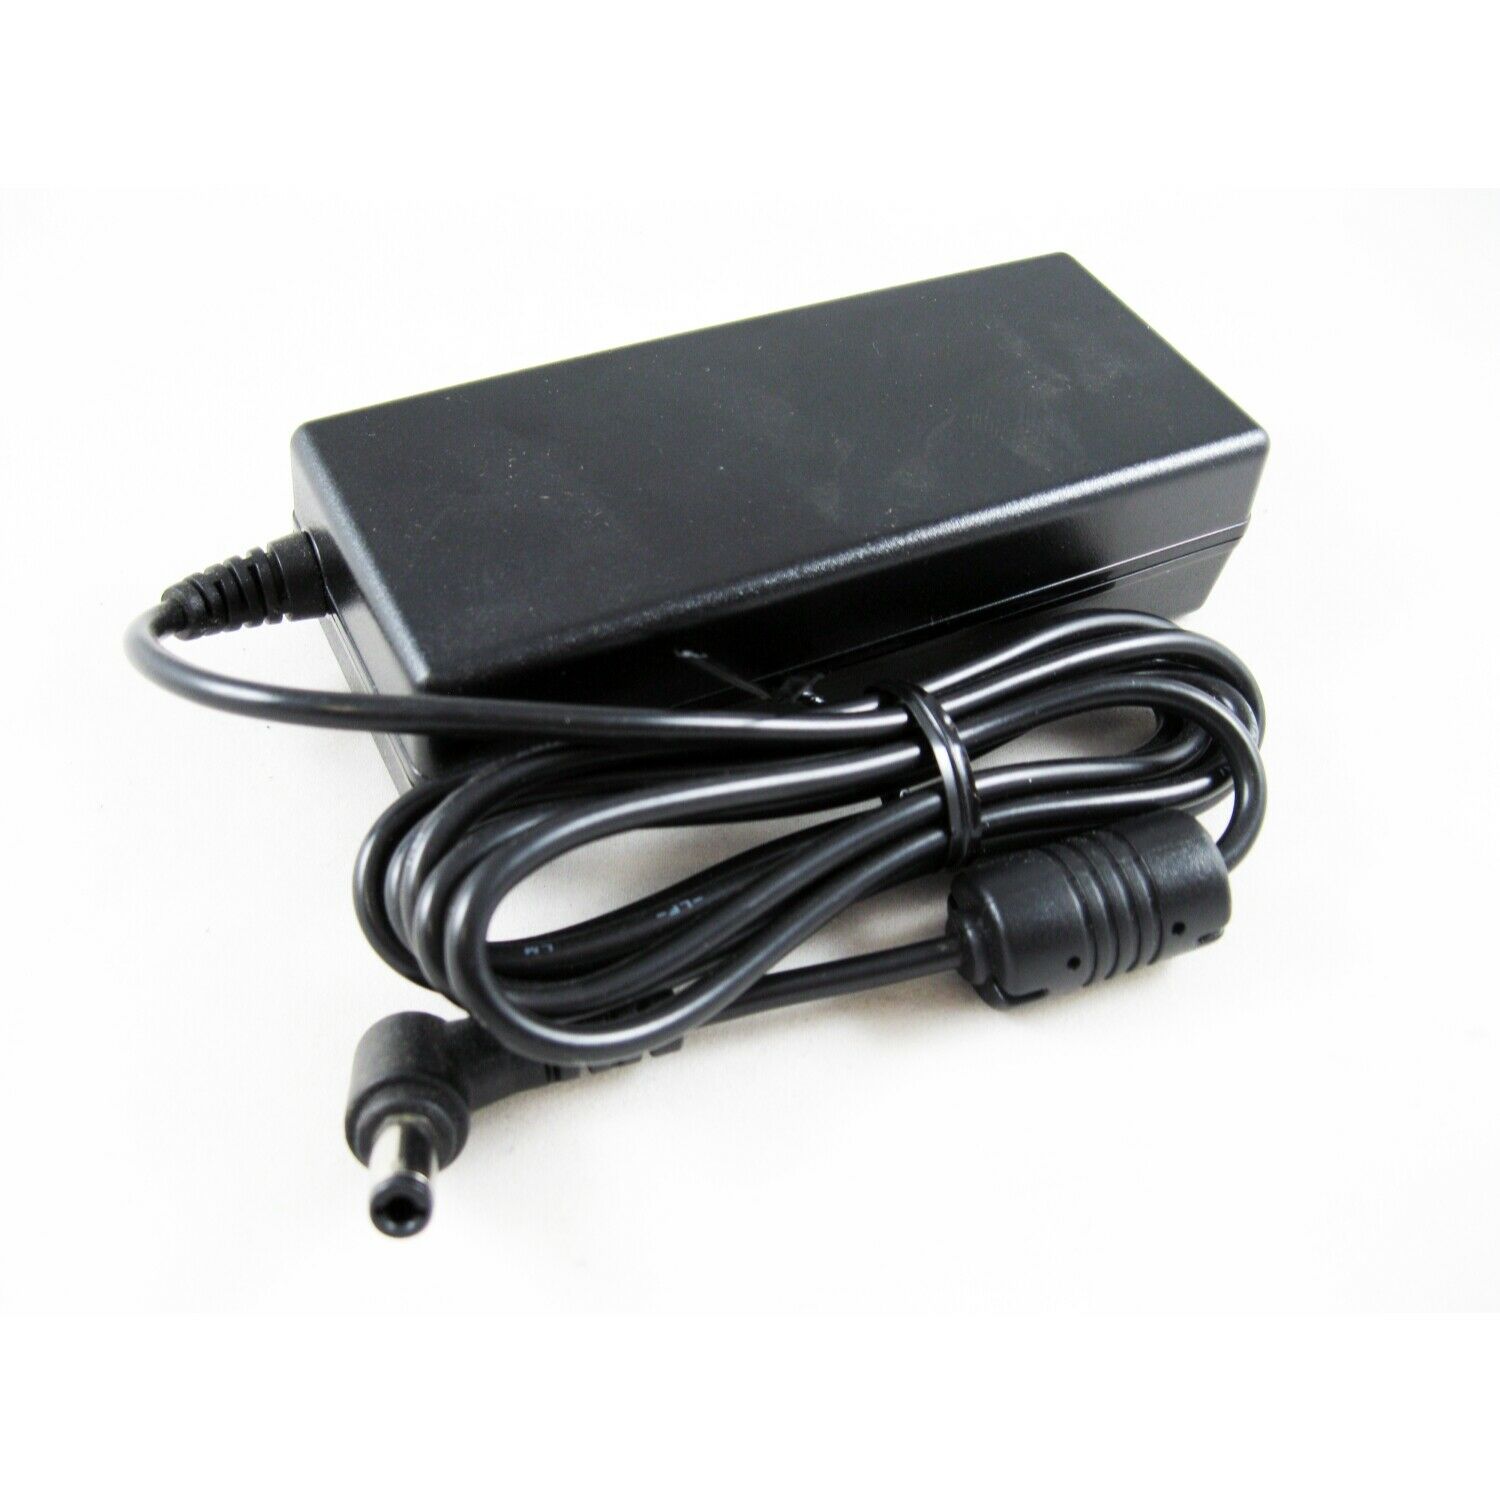 medion md 98330 laptop ac adapter